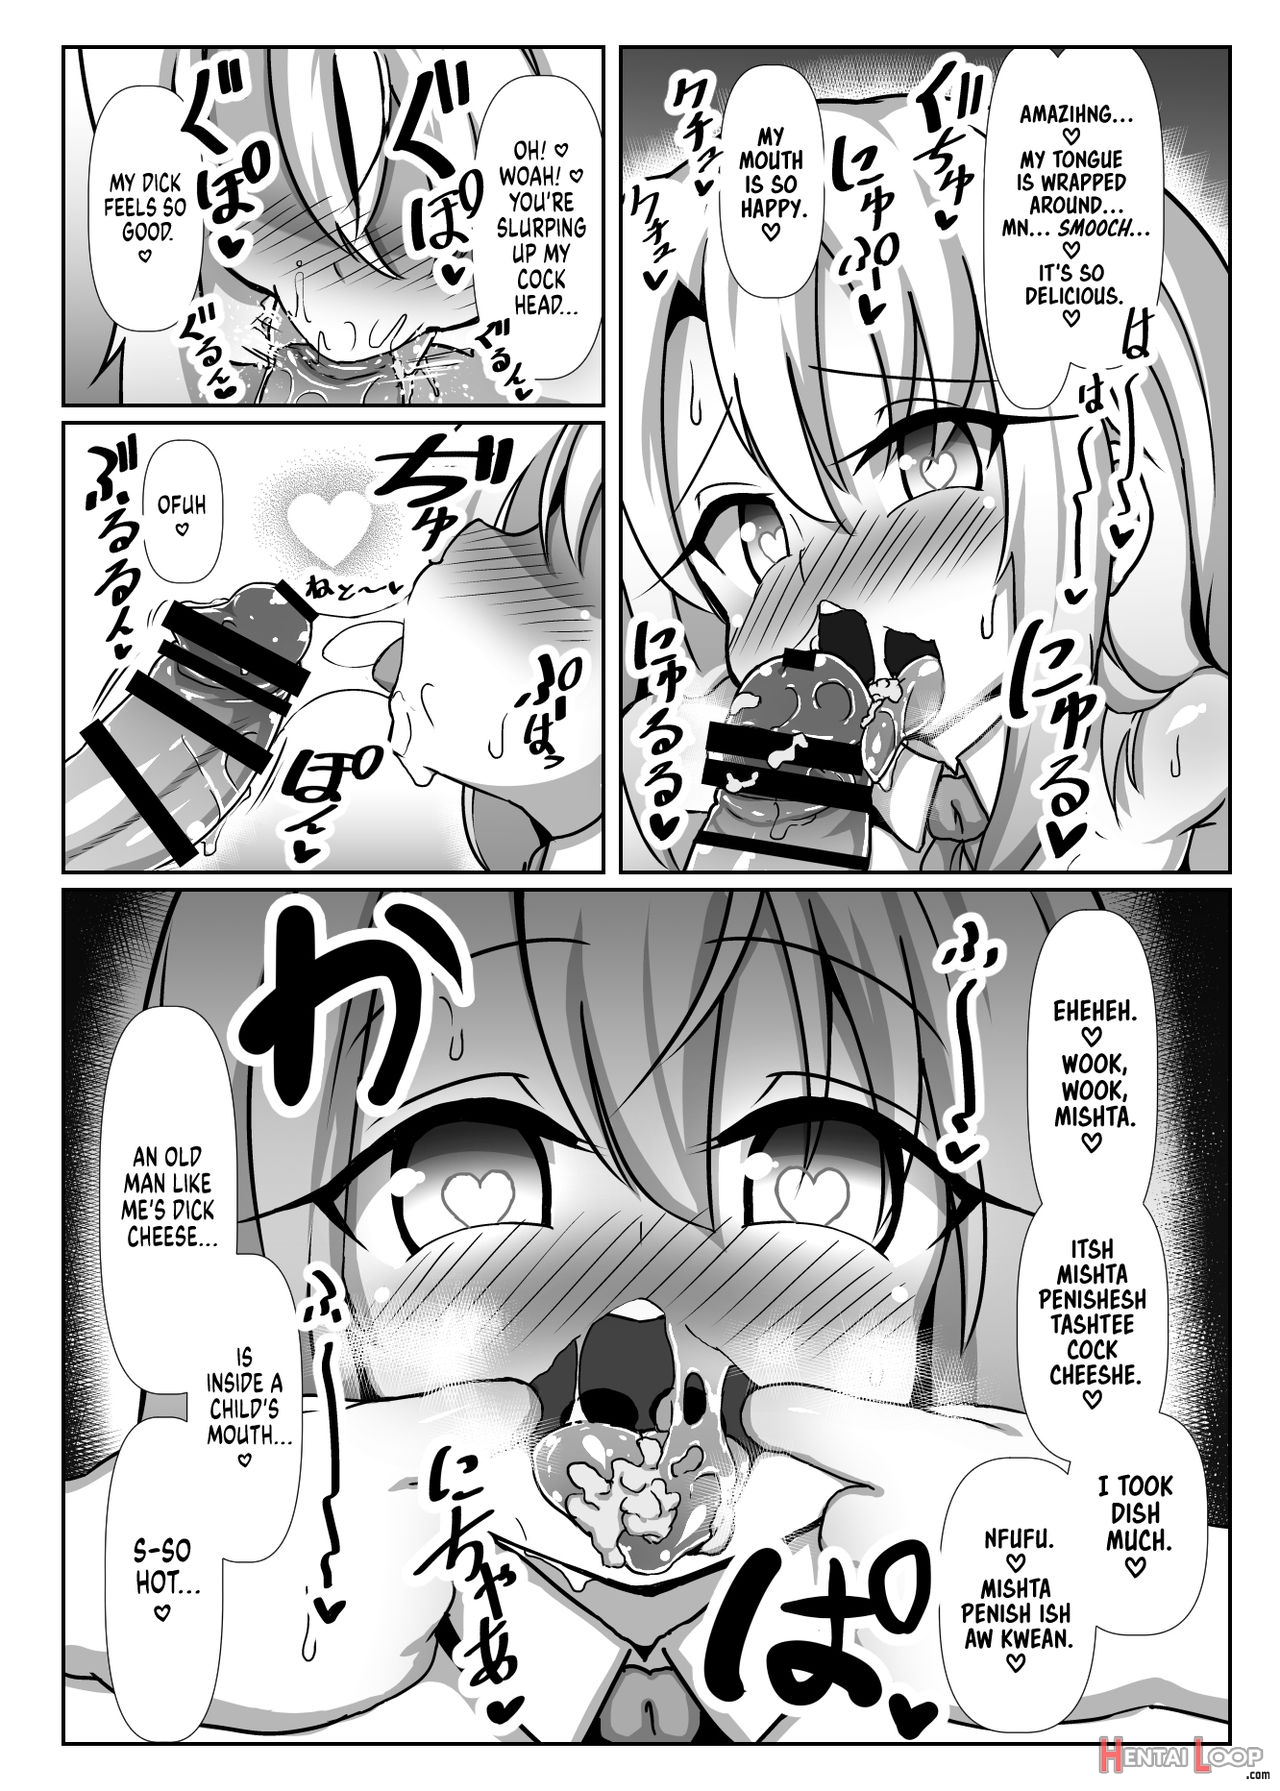 Perverted Illya-chan's Lovey Dovey Responsibility Free Baby Making Life page 10